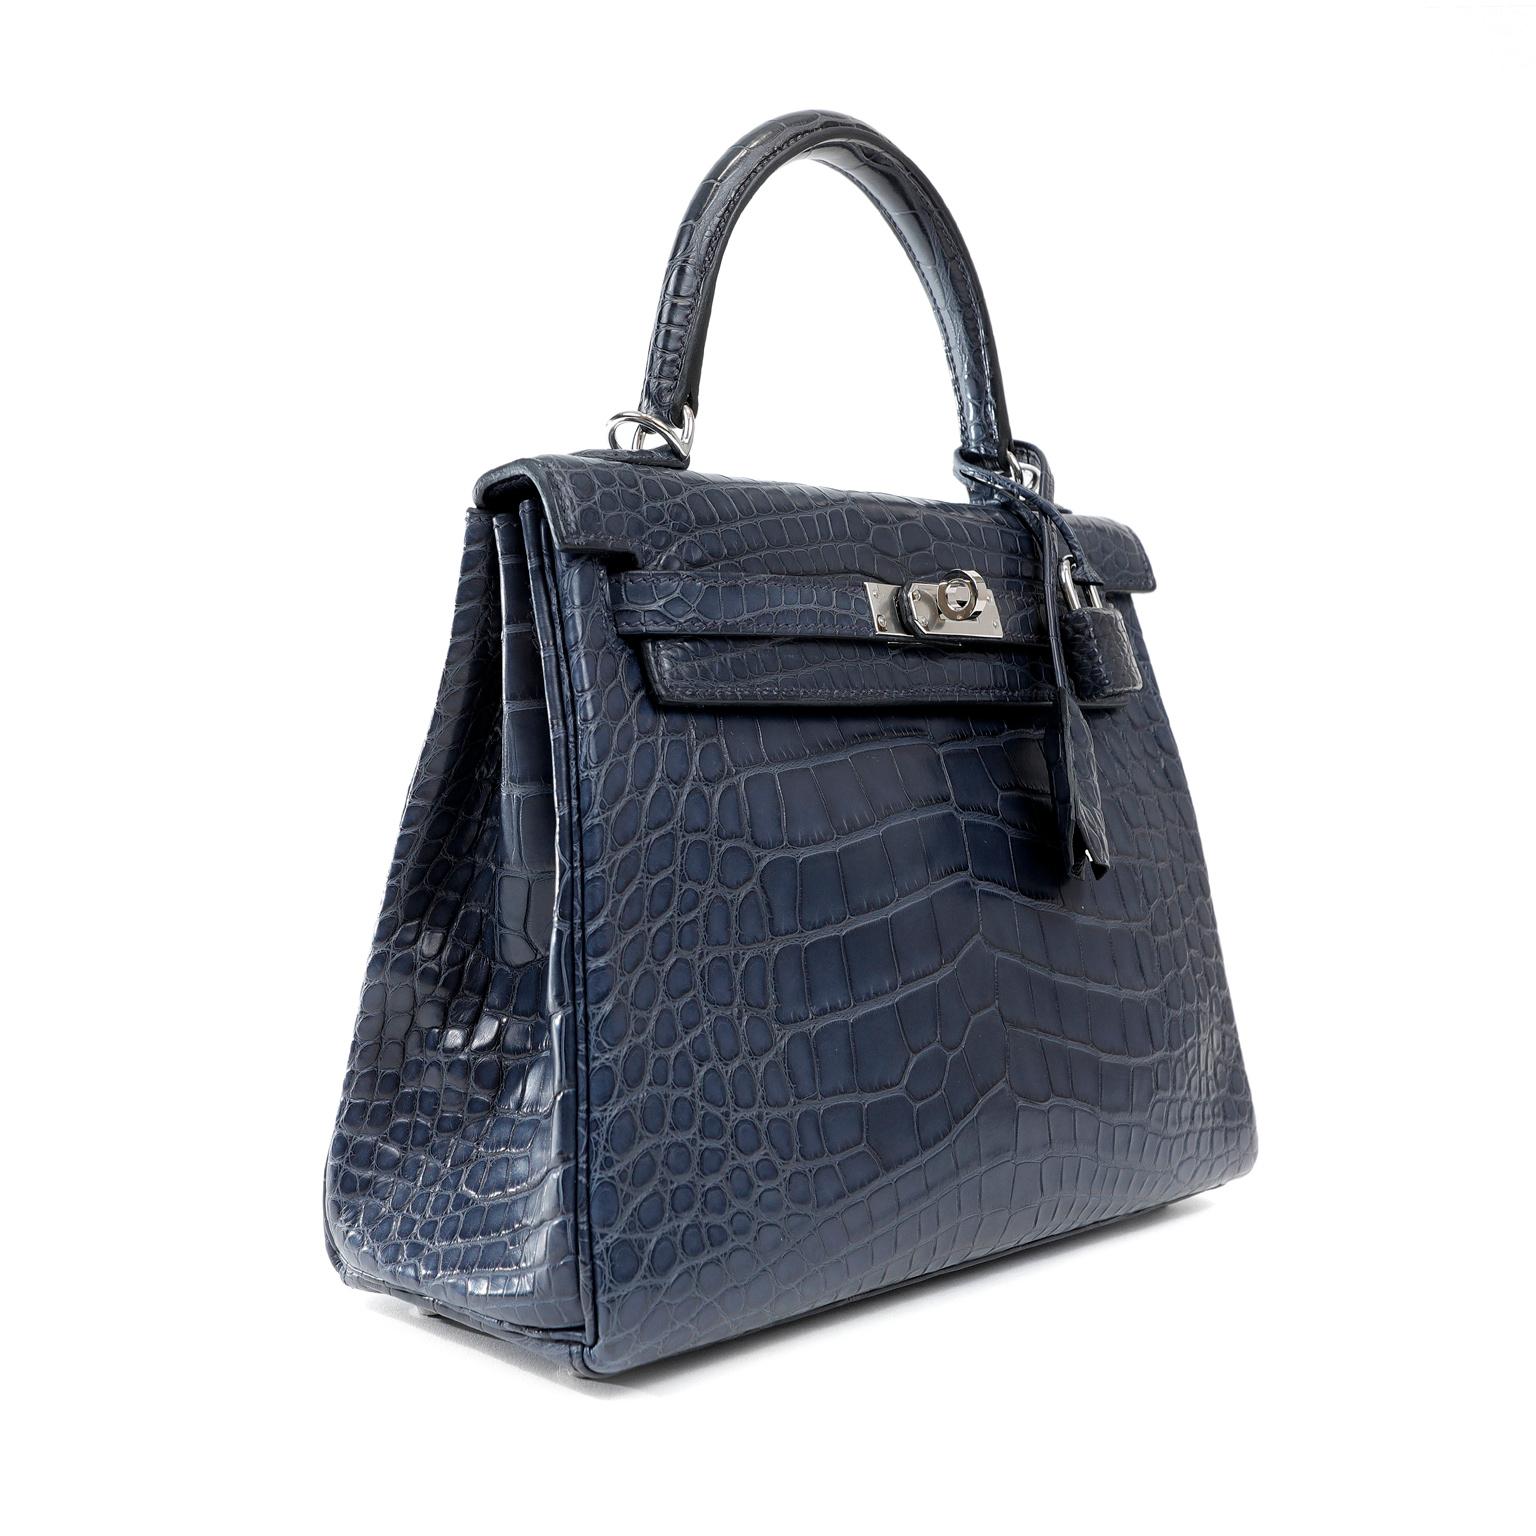 This authentic Hermès Navy Crocodile 25 cm Kelly is in pristine unworn condition.  The protective plastic remains intact on the hardware.   Hermès bags are considered the ultimate luxury item worldwide.  Each piece is handcrafted with waitlists that